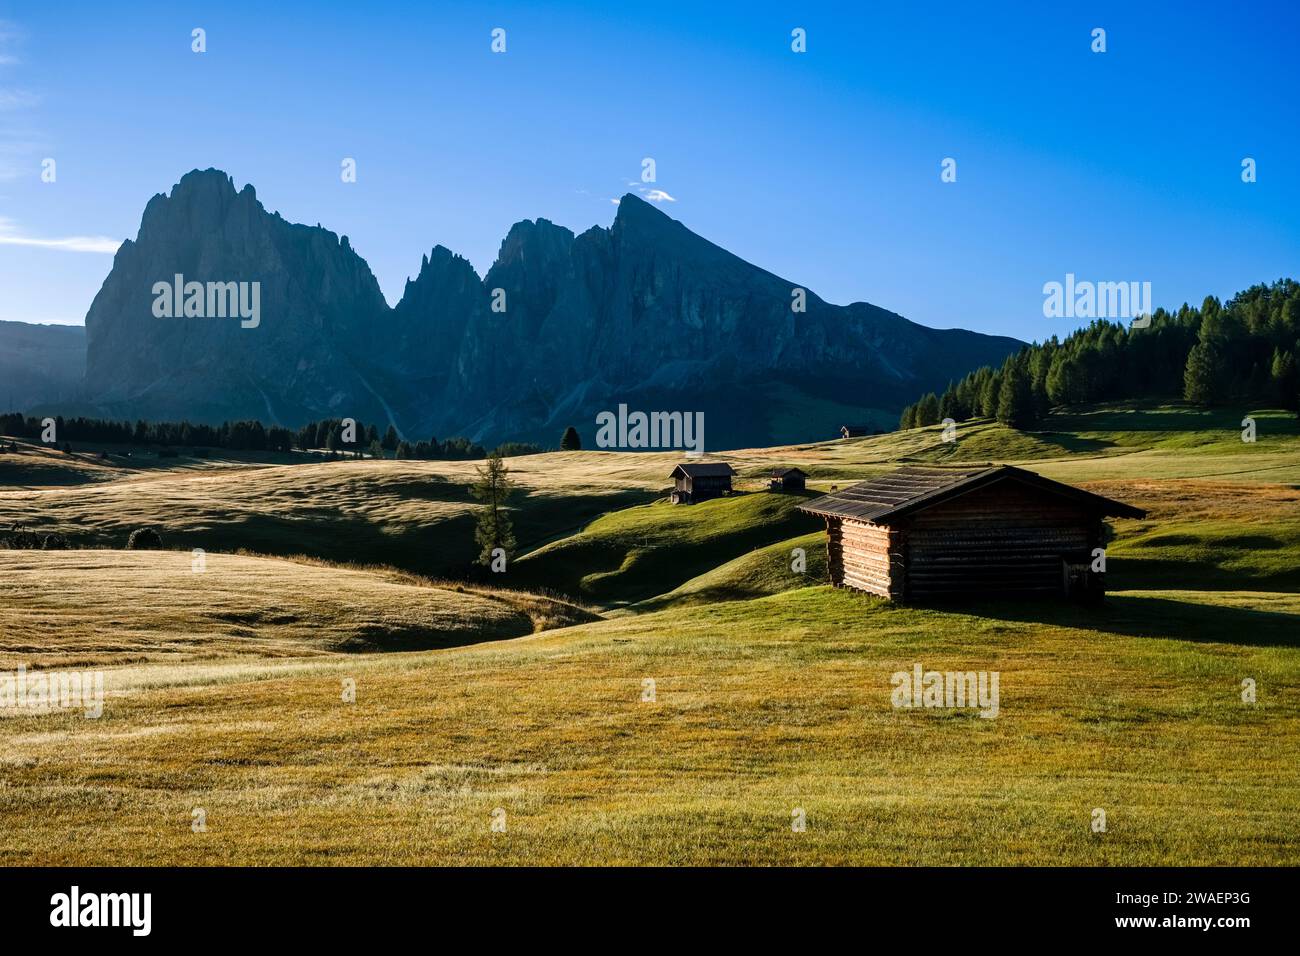 Hilly agricultural countryside with wooden huts and trees at Seiser Alm, Alpe di Siusi, the mountain Plattkofel, Sasso Piatto, in the distance. Stock Photo